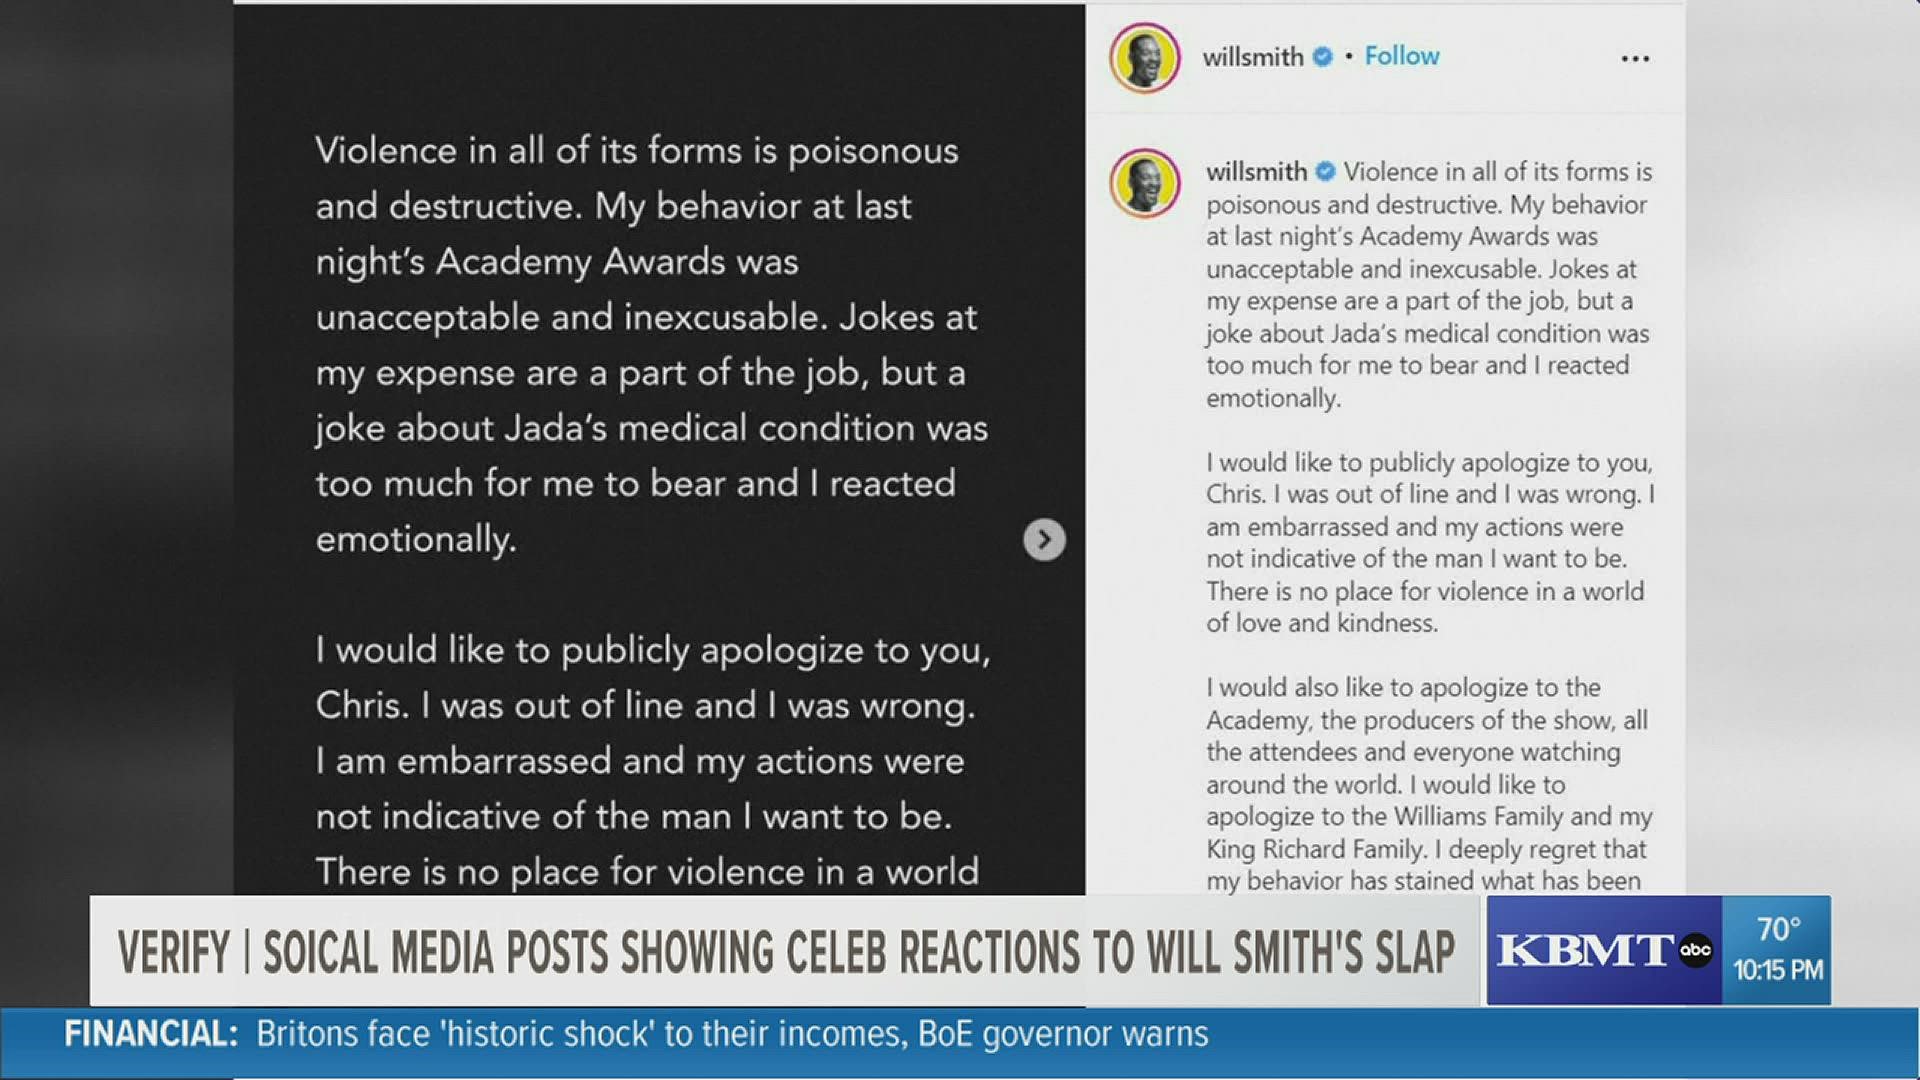 Will Smith has since released a public apology to Chris Rock stating he was, "out of line and wrong."